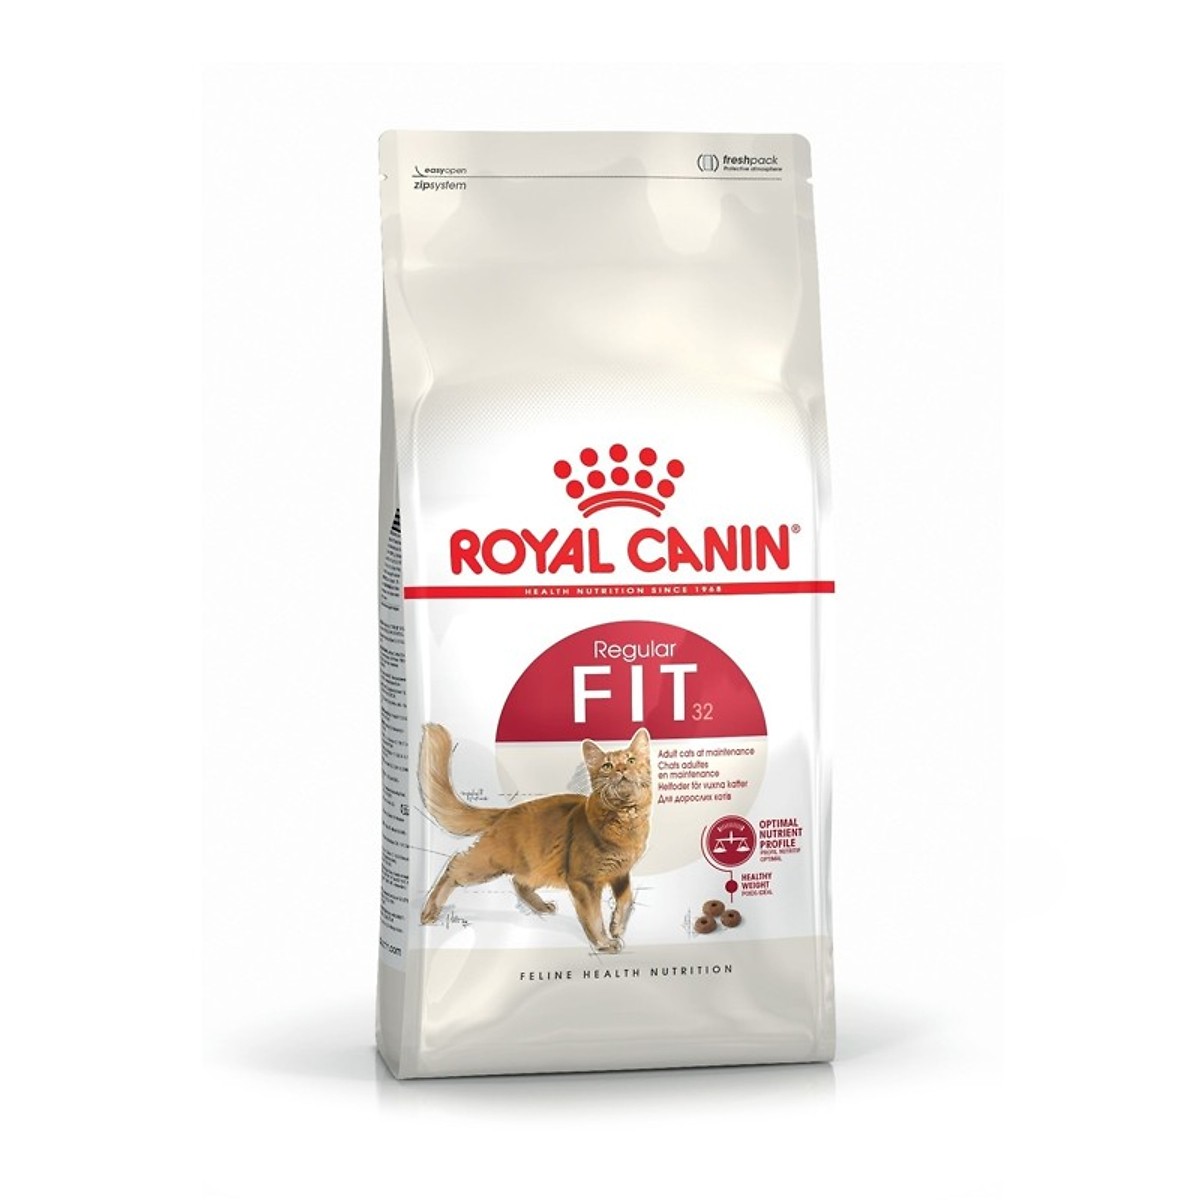 ROYAL CANIN FIT32 400g!